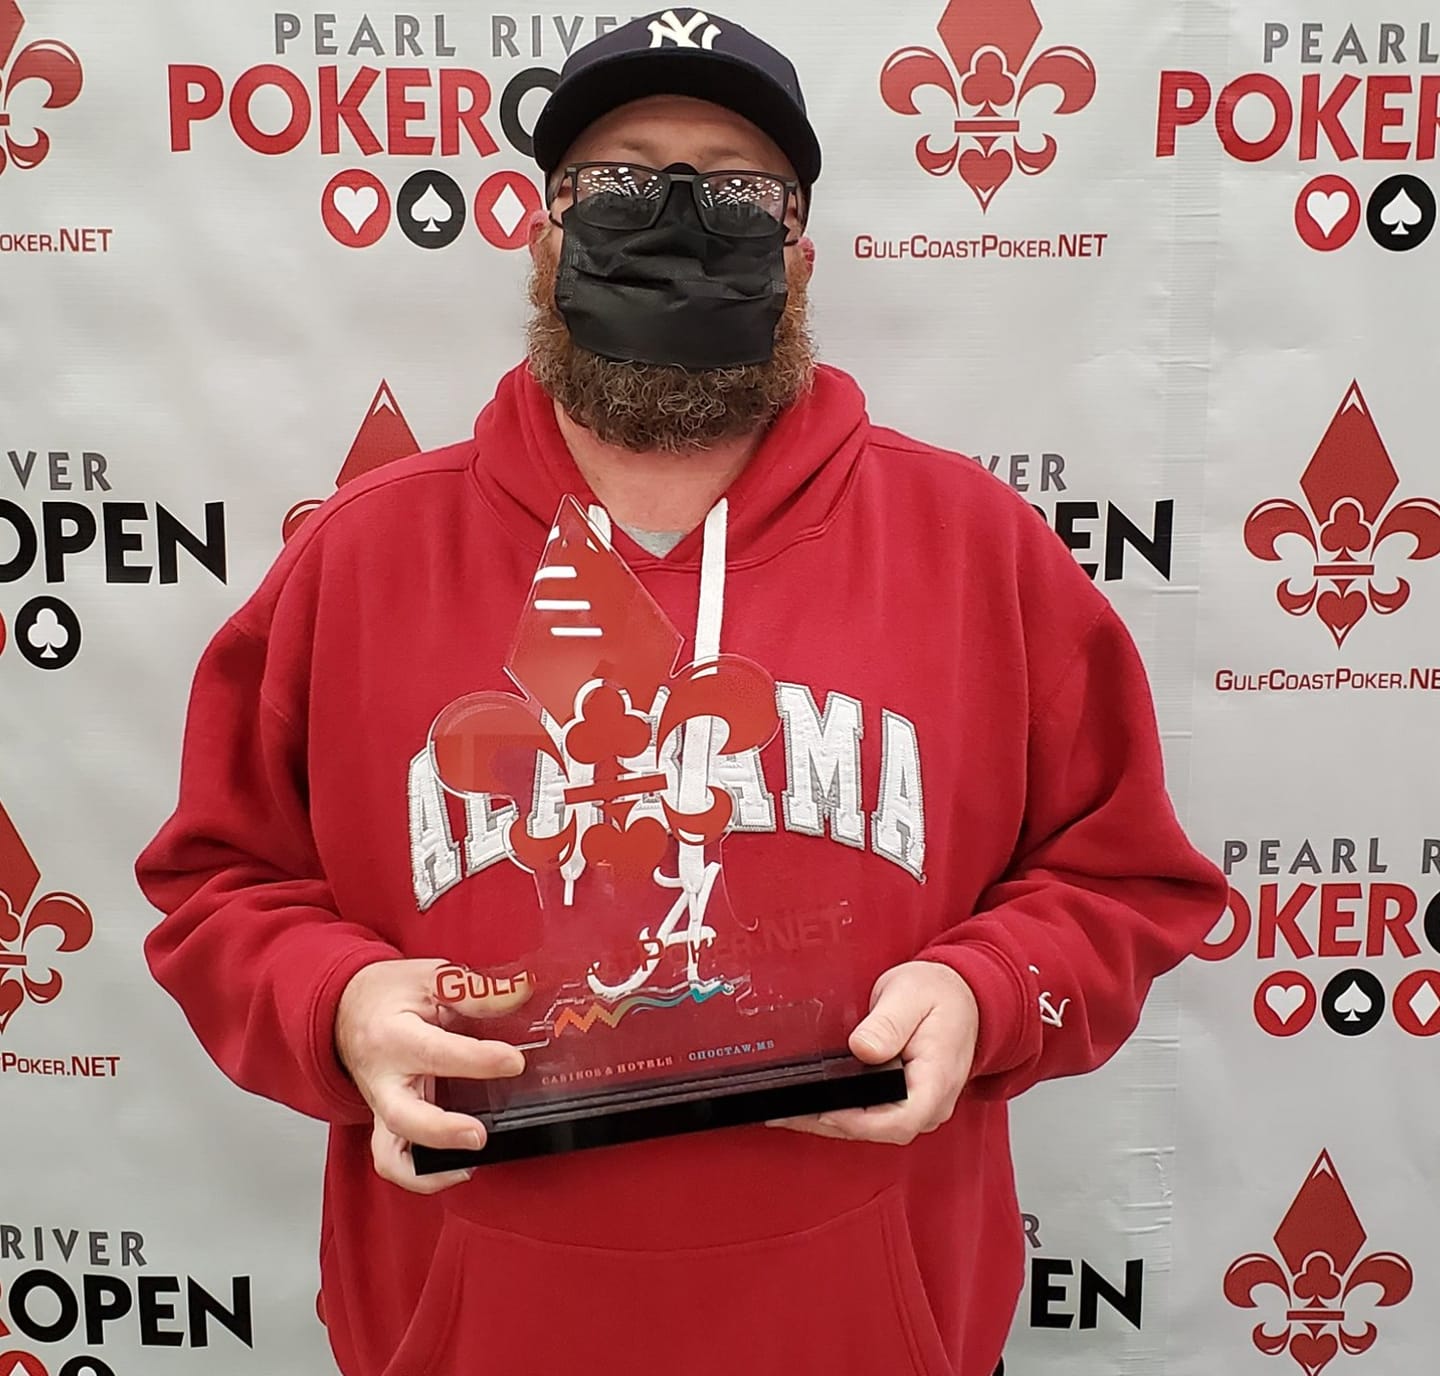 Christopher Nunnally Wins Pearl River Poker Open 600 Main Event